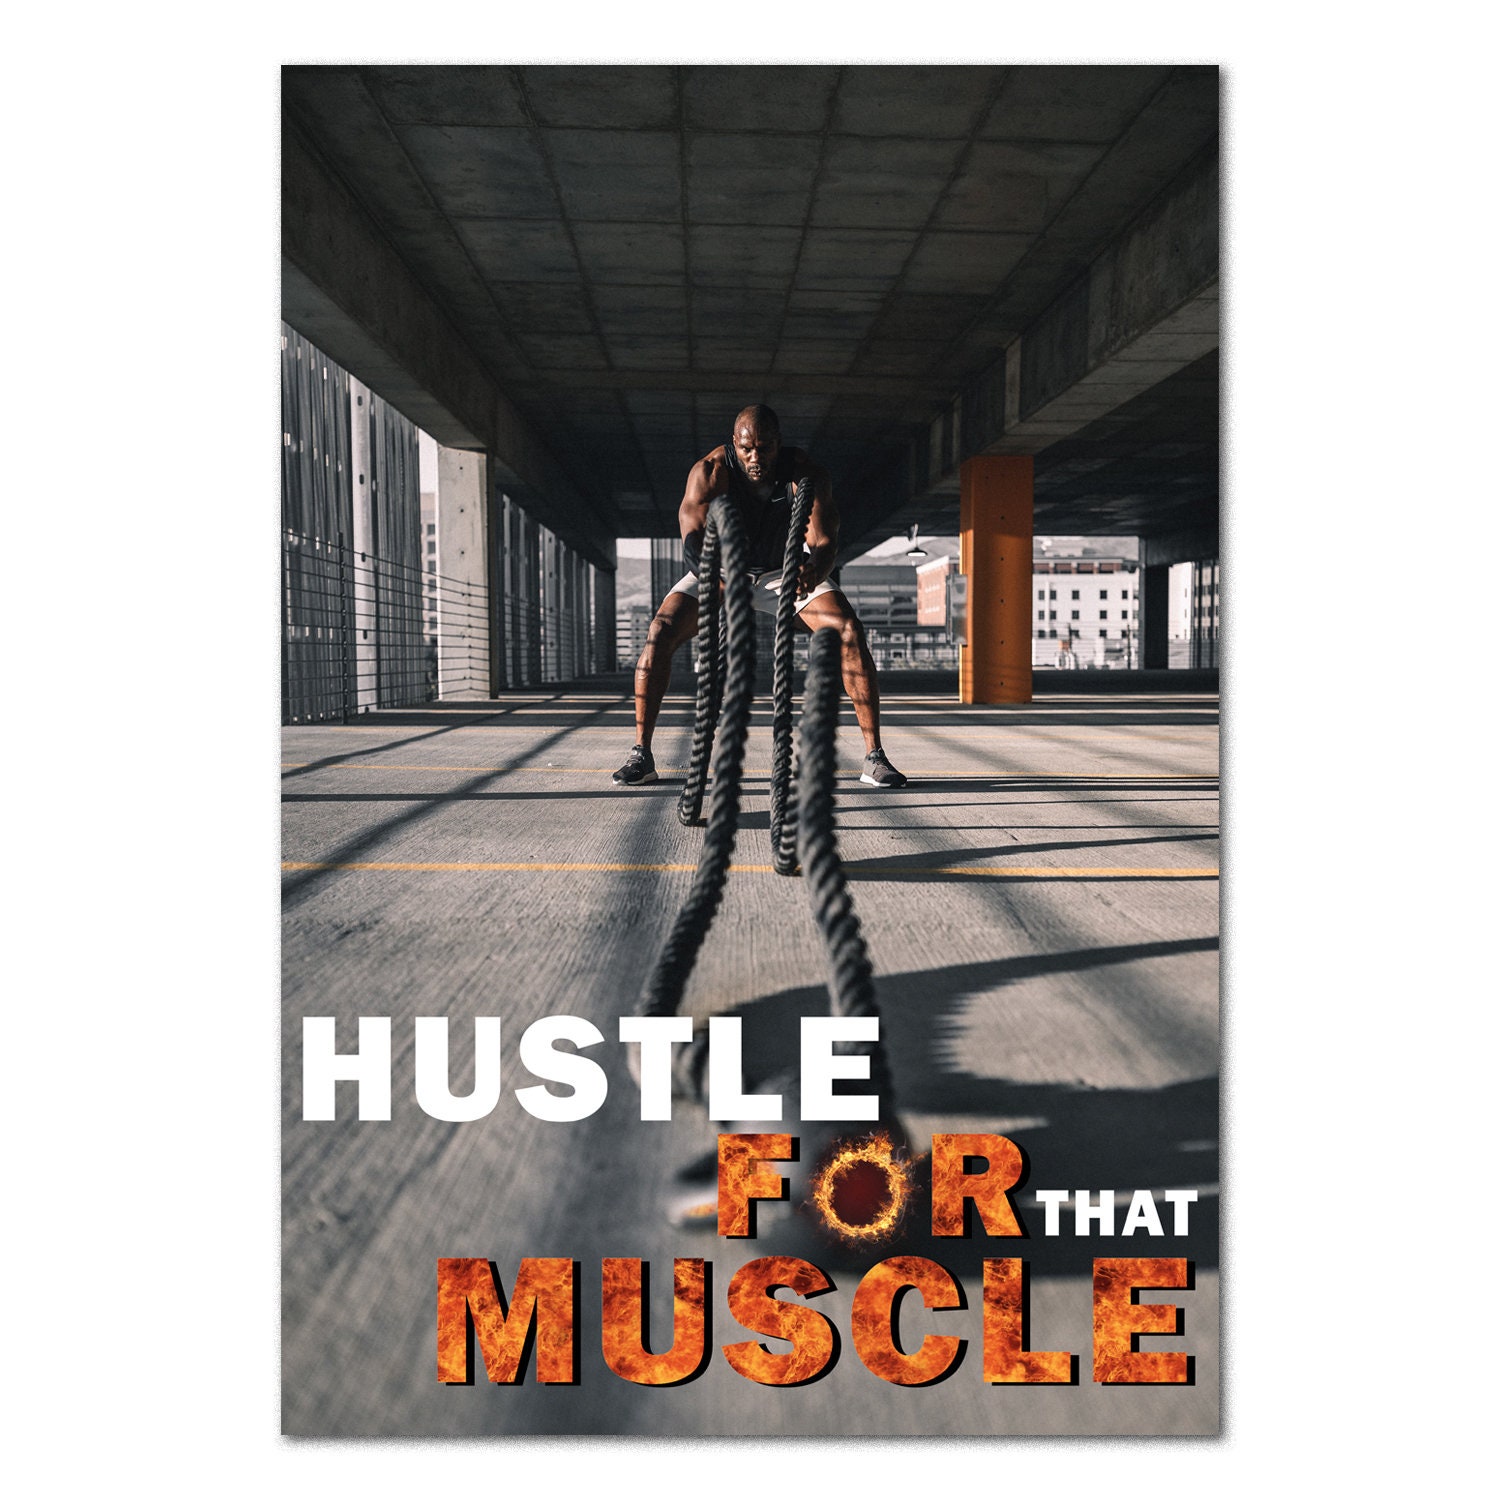 Fitness Posters Motivational Inspirational Quotes Prints for Bodybuilding Workout Men Women 20 - Wall Art for Home Office Gym - High Quality